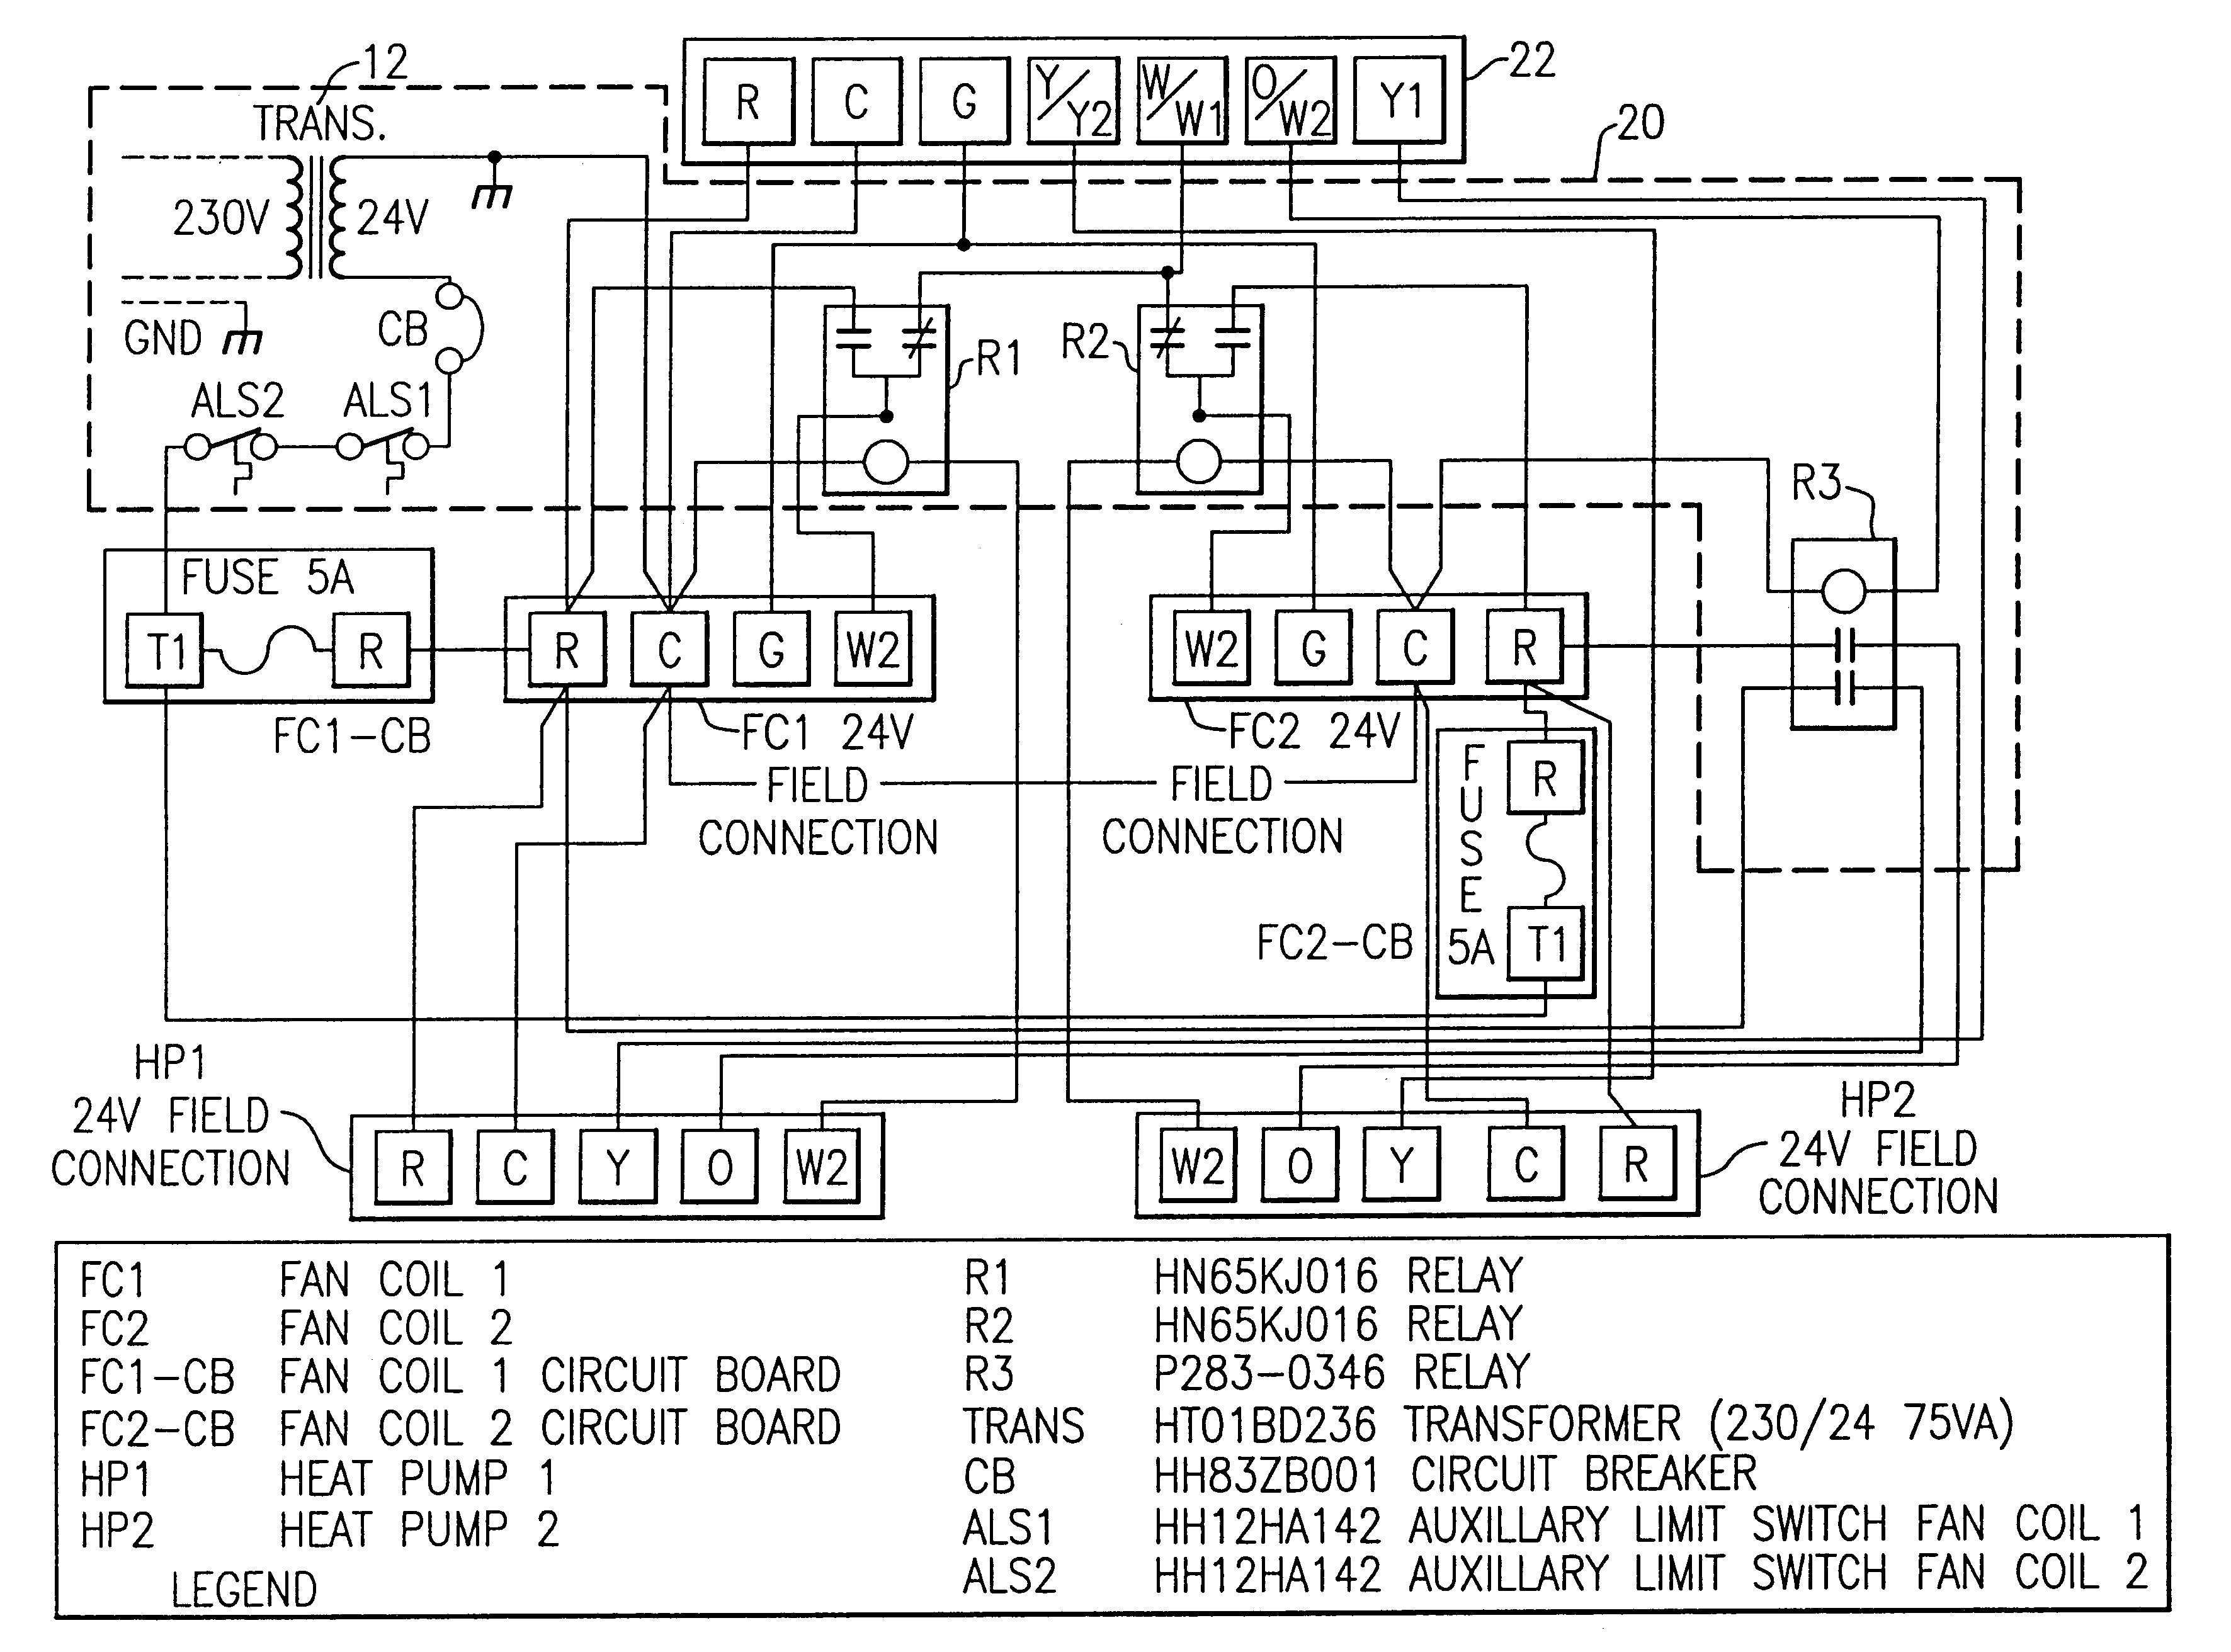 Wiring Diagram for Home Ac Unit Save York Ac Unit Wiring Diagram Diagrams Air Conditioners Best